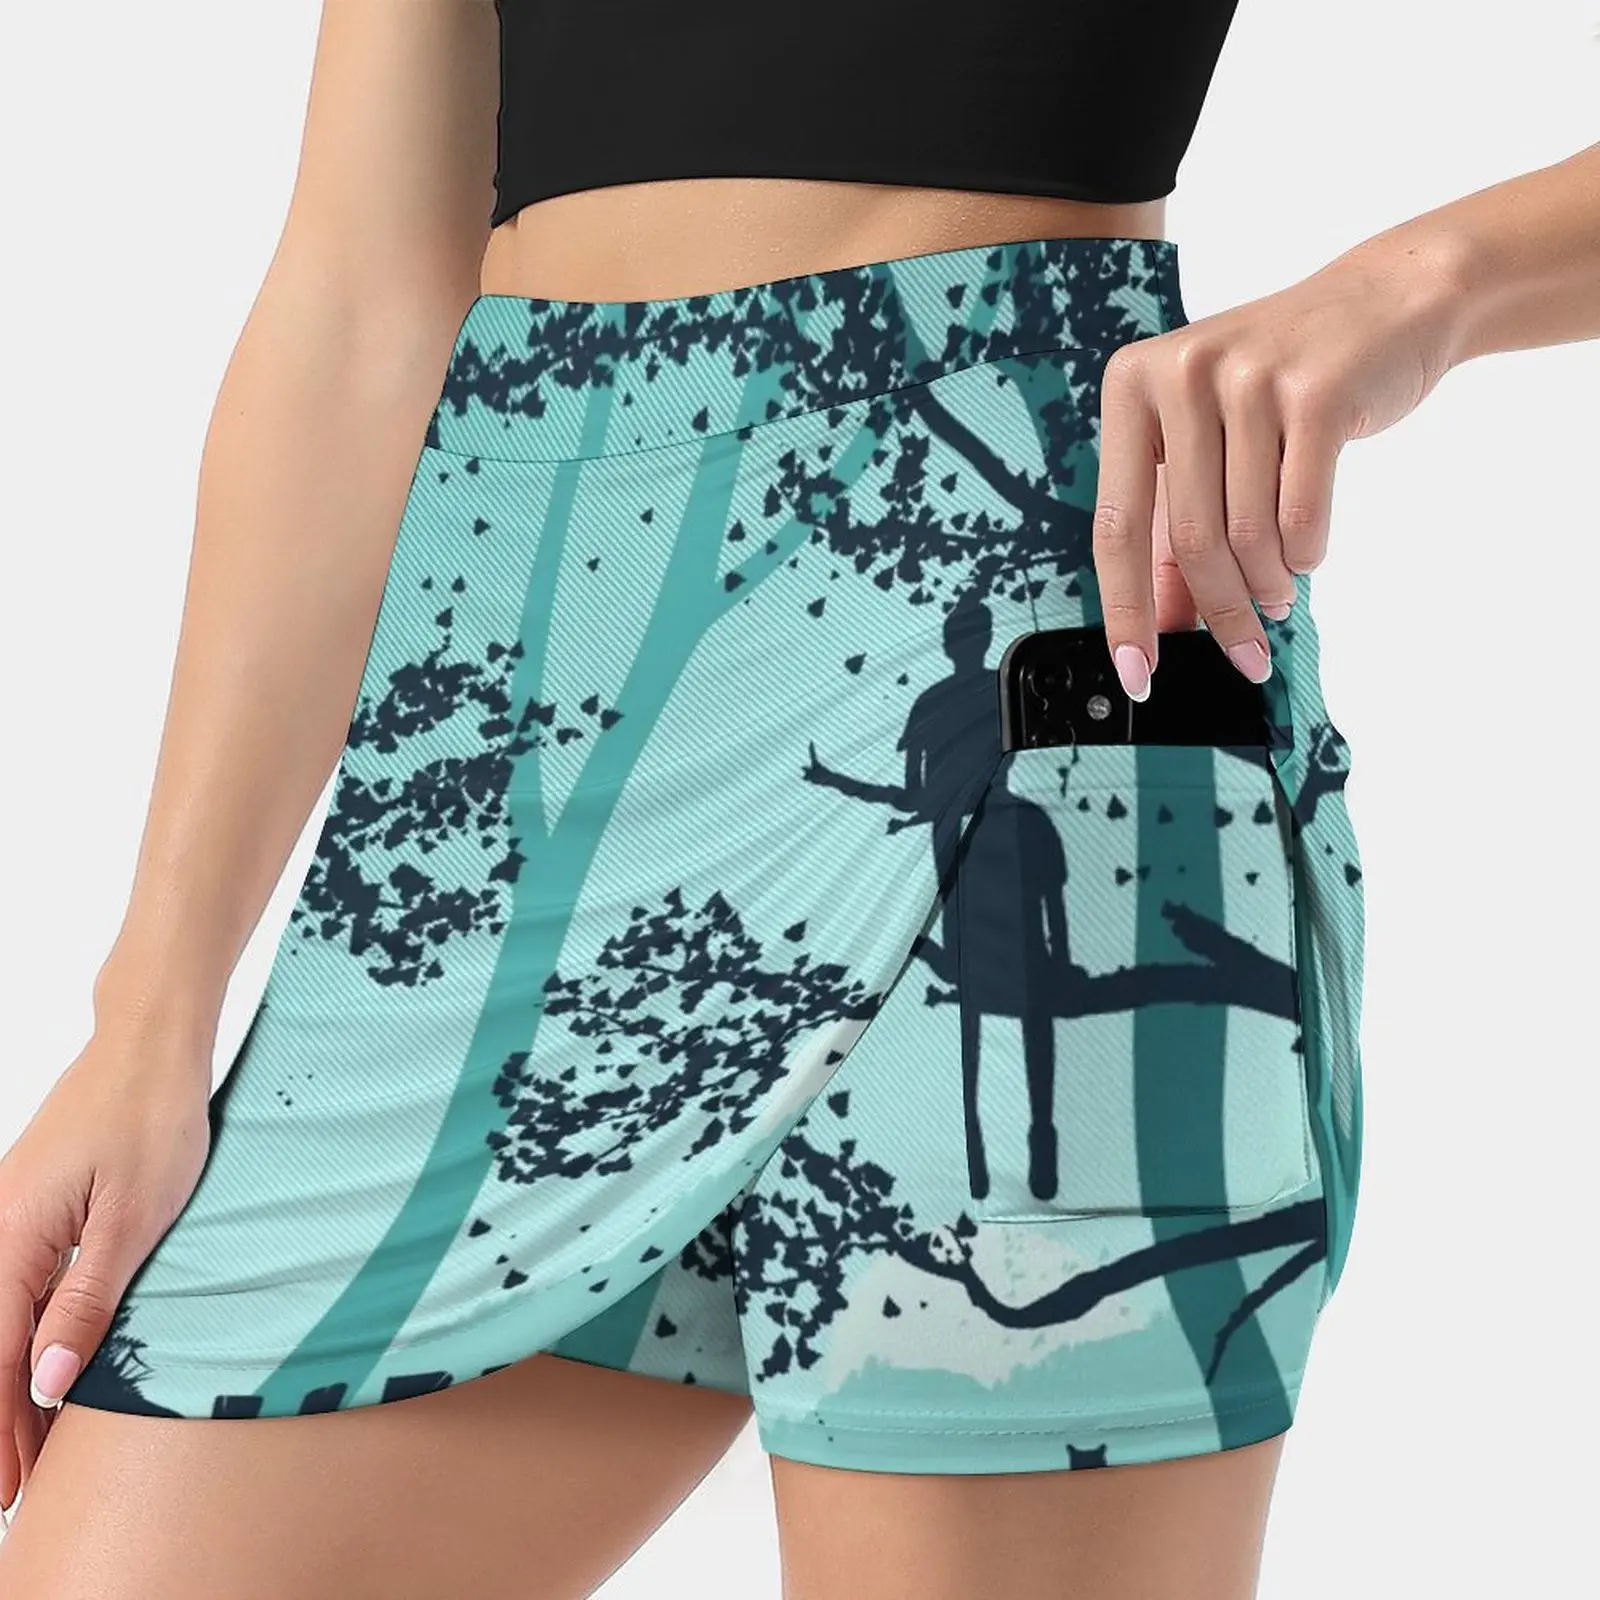 

Don'T Look Back In Anger Skirts Woman Fashion 2022 Pant Skirt Mini Skirts Office Short Skirt Forest Sunset Blue Nature Birds